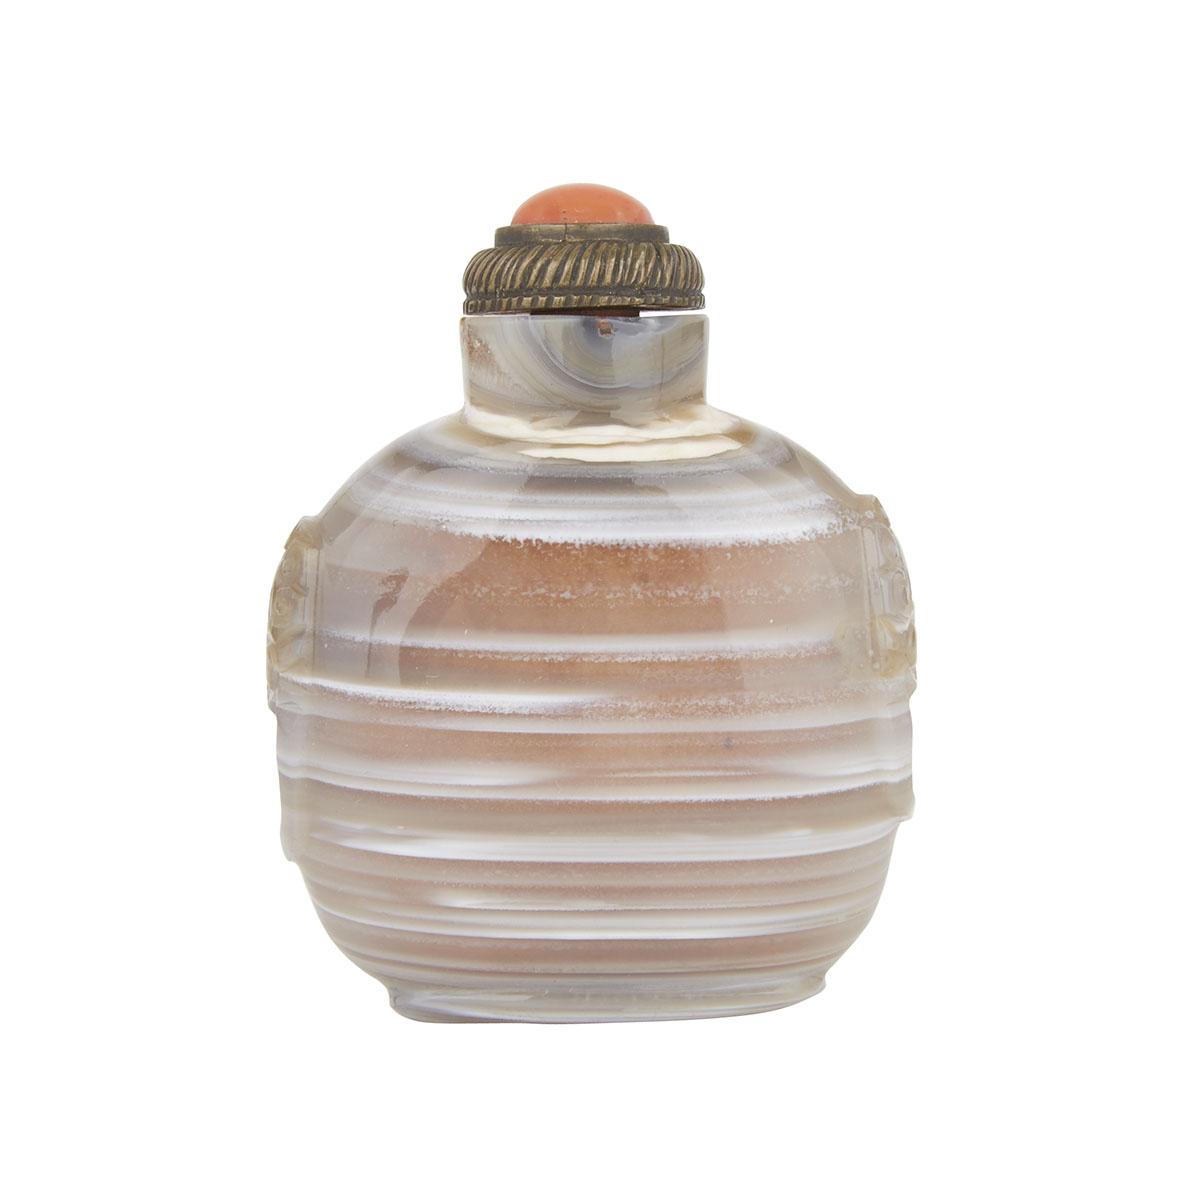 A LARGE BANDED AGATE SNUFF BOTTLE, 19TH CENTURY 清十九世紀 截子瑪瑙鼻煙壺 The bottle of flattened, rounded